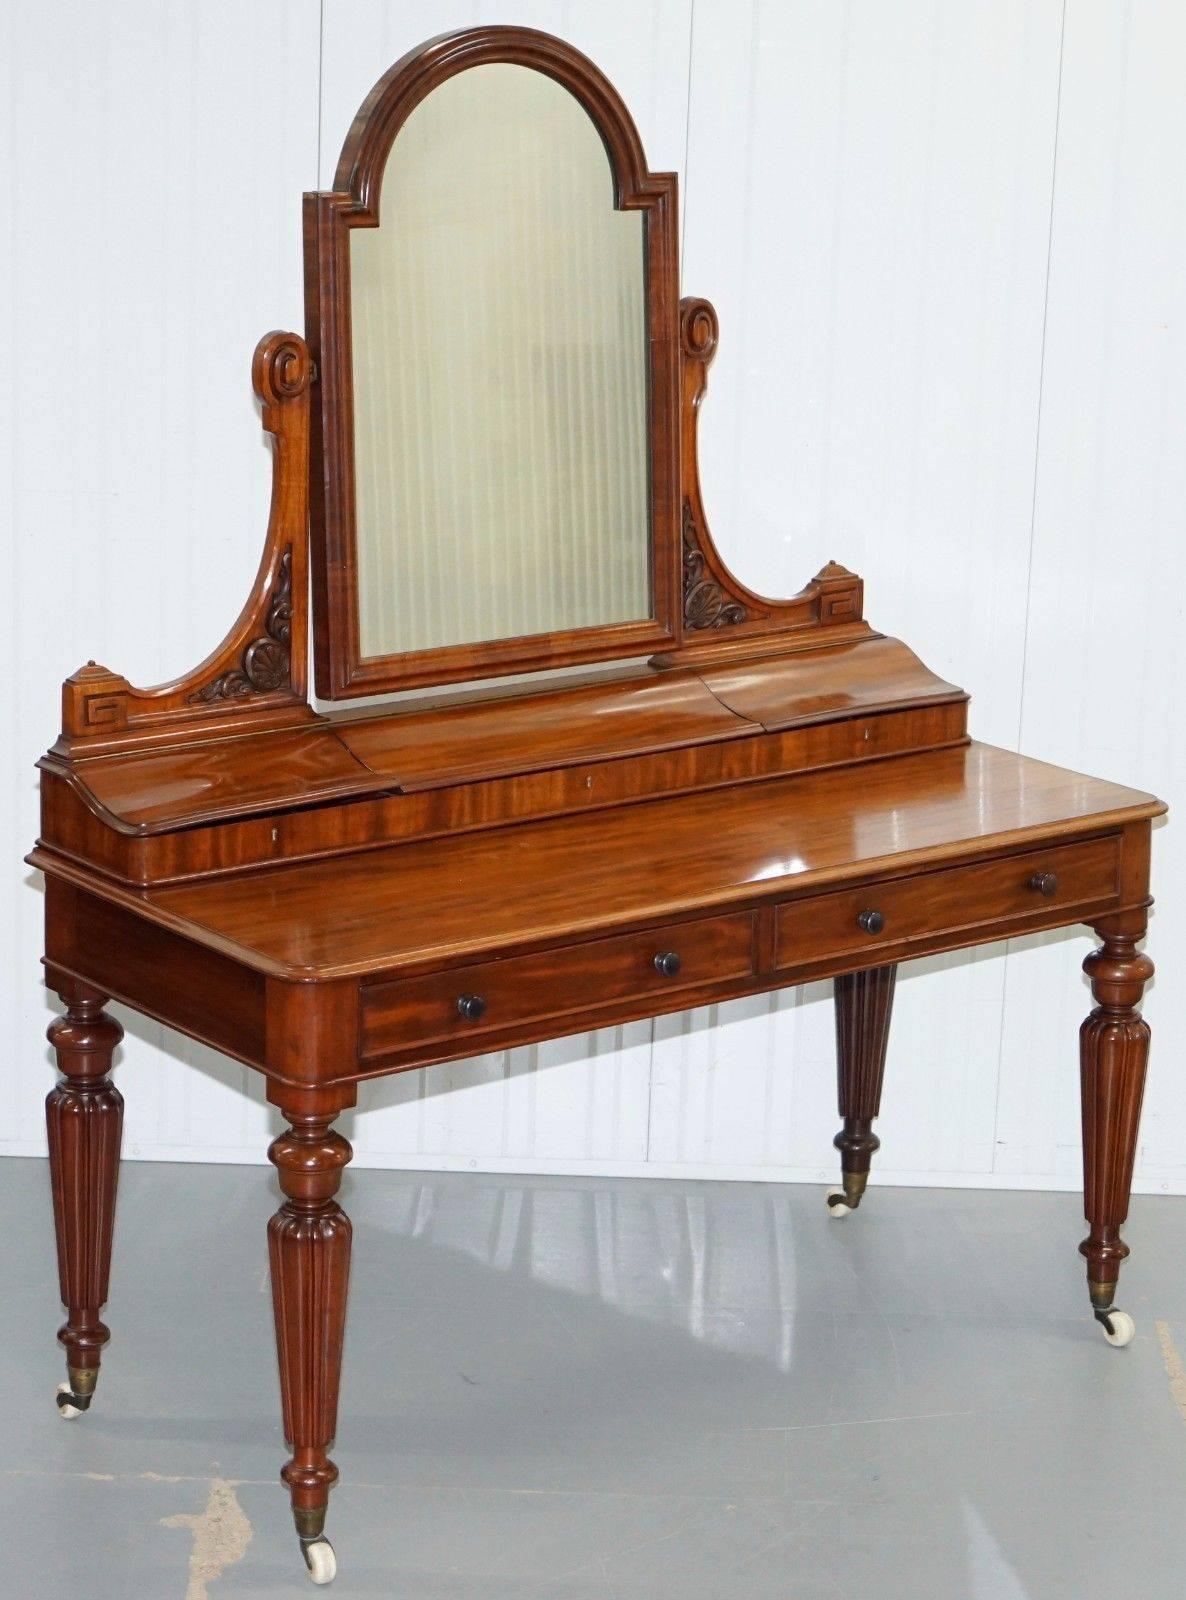 British Lovely William IV Mahogany Dressing Table with Gillows Inspired Legs, circa 1830